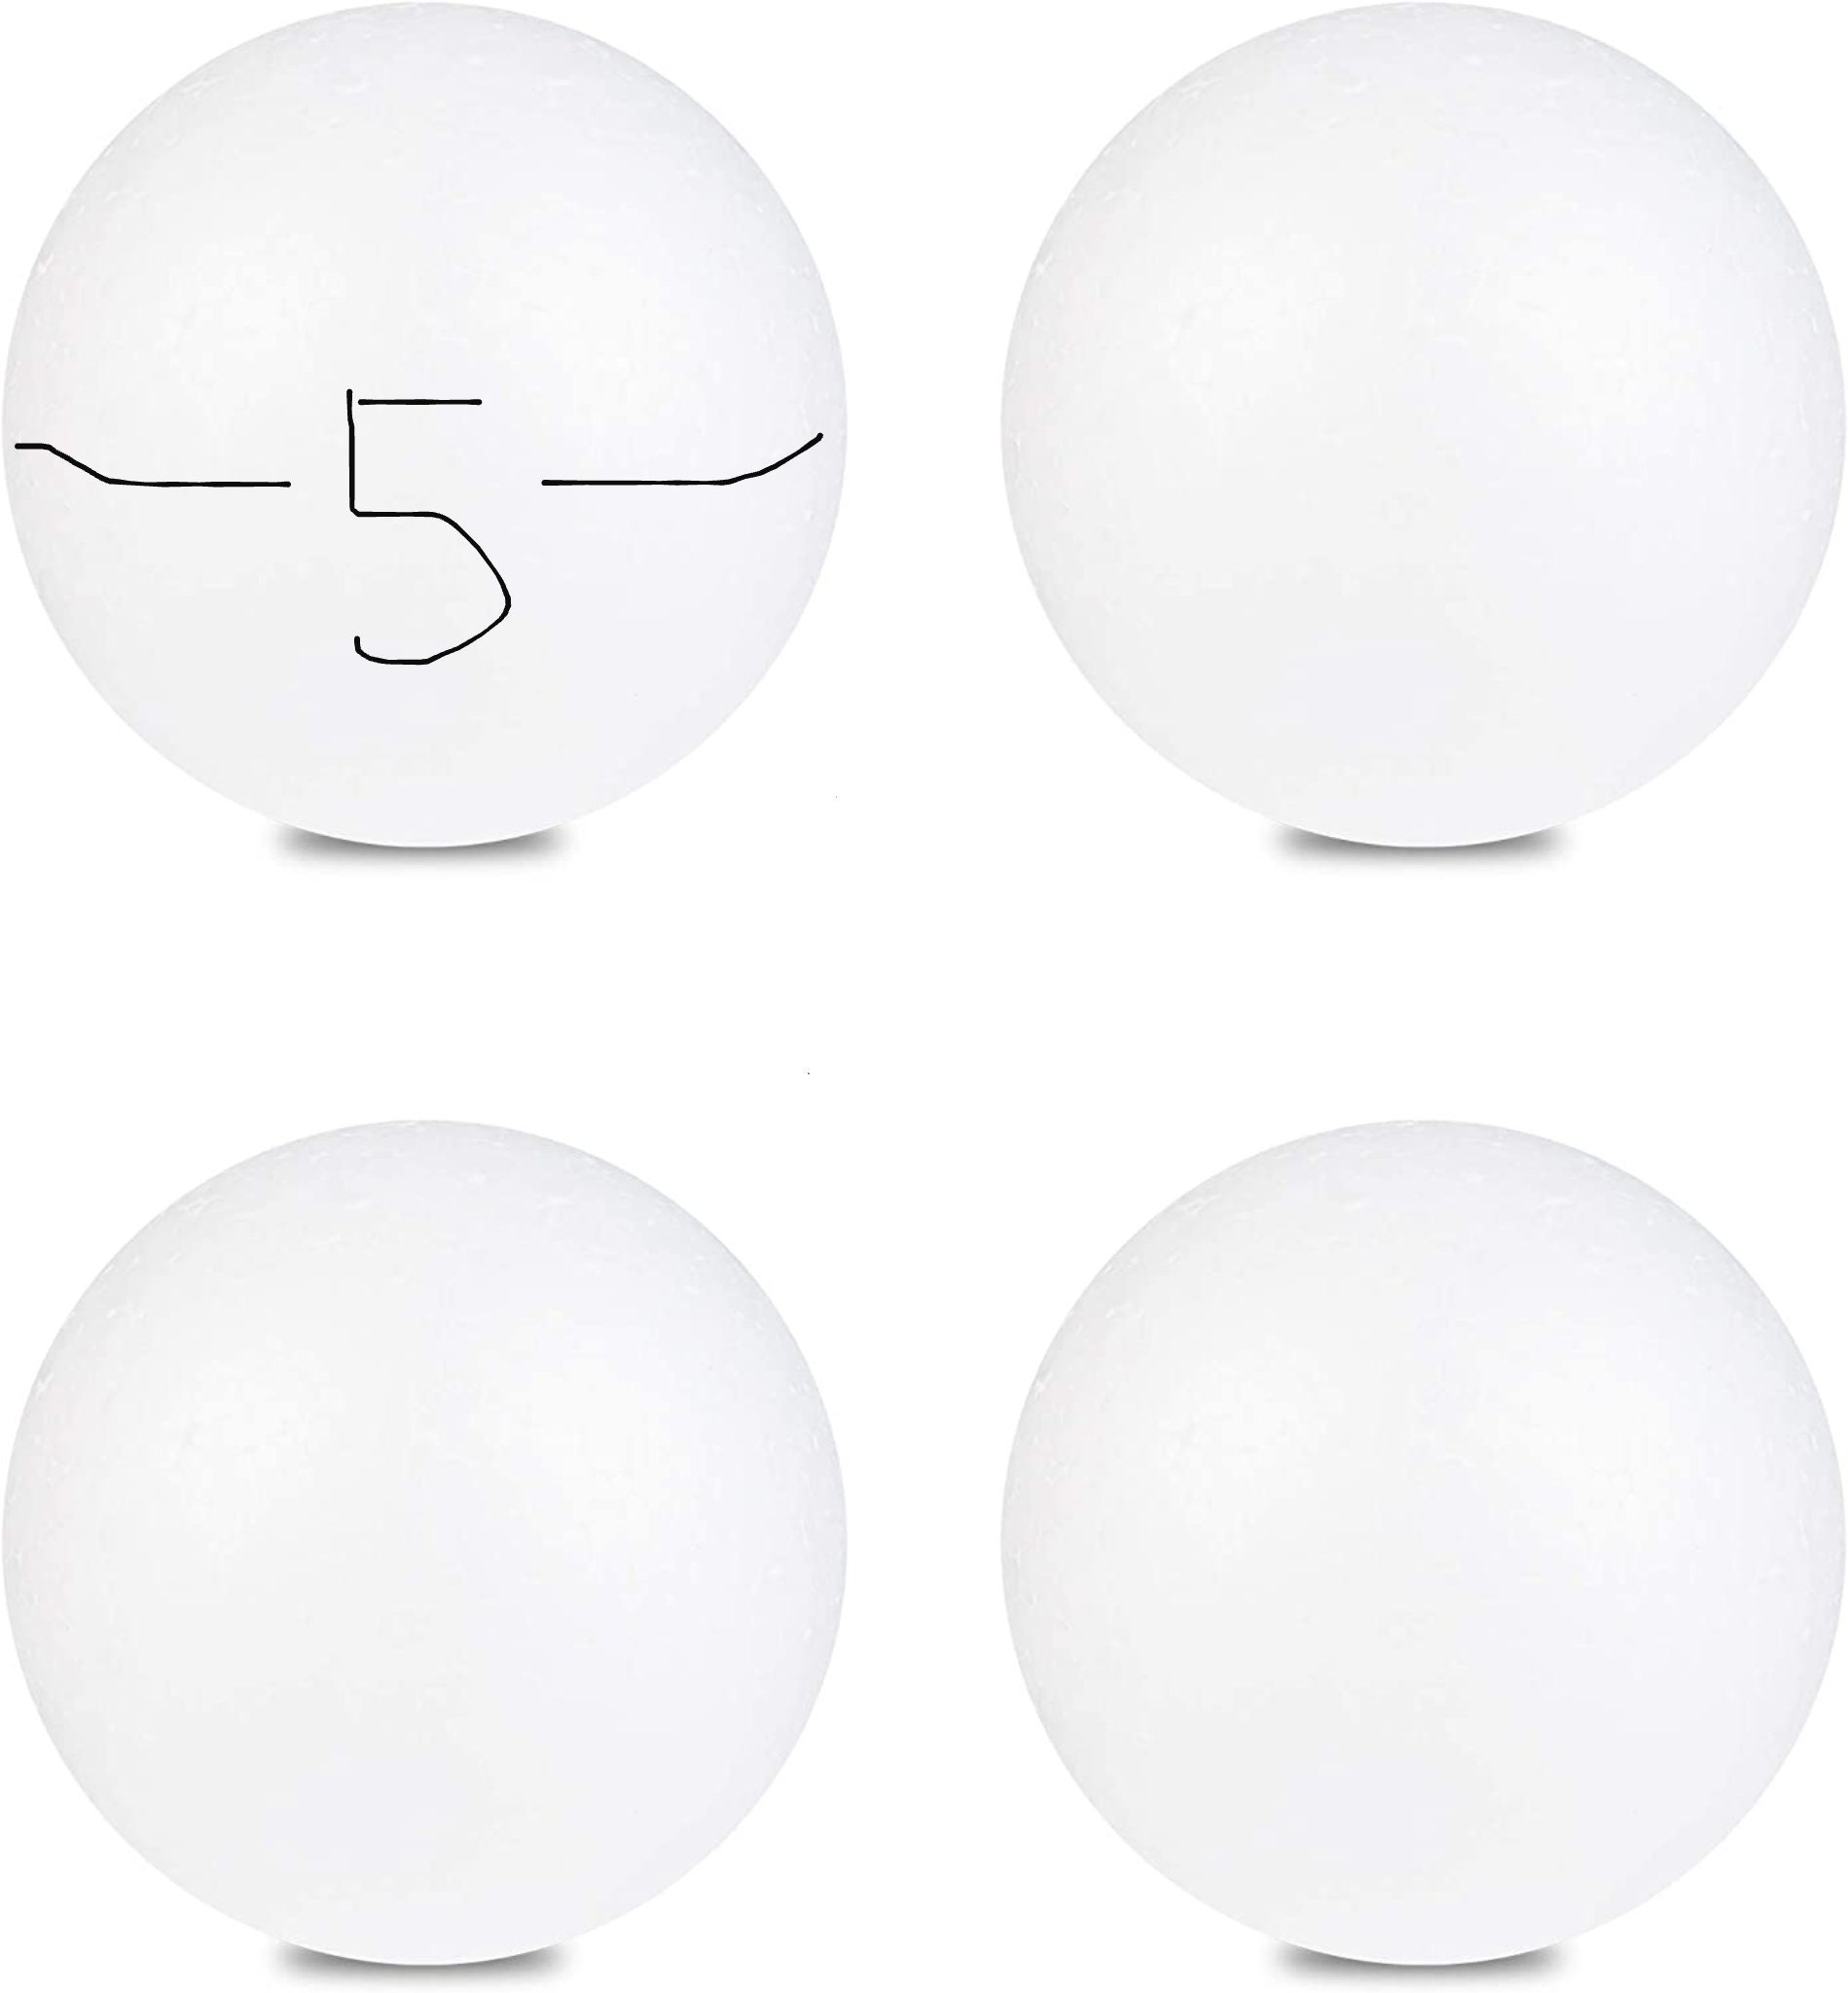 White Foam Board 3/16 Four Pack Rectangle and Circle Shapes 